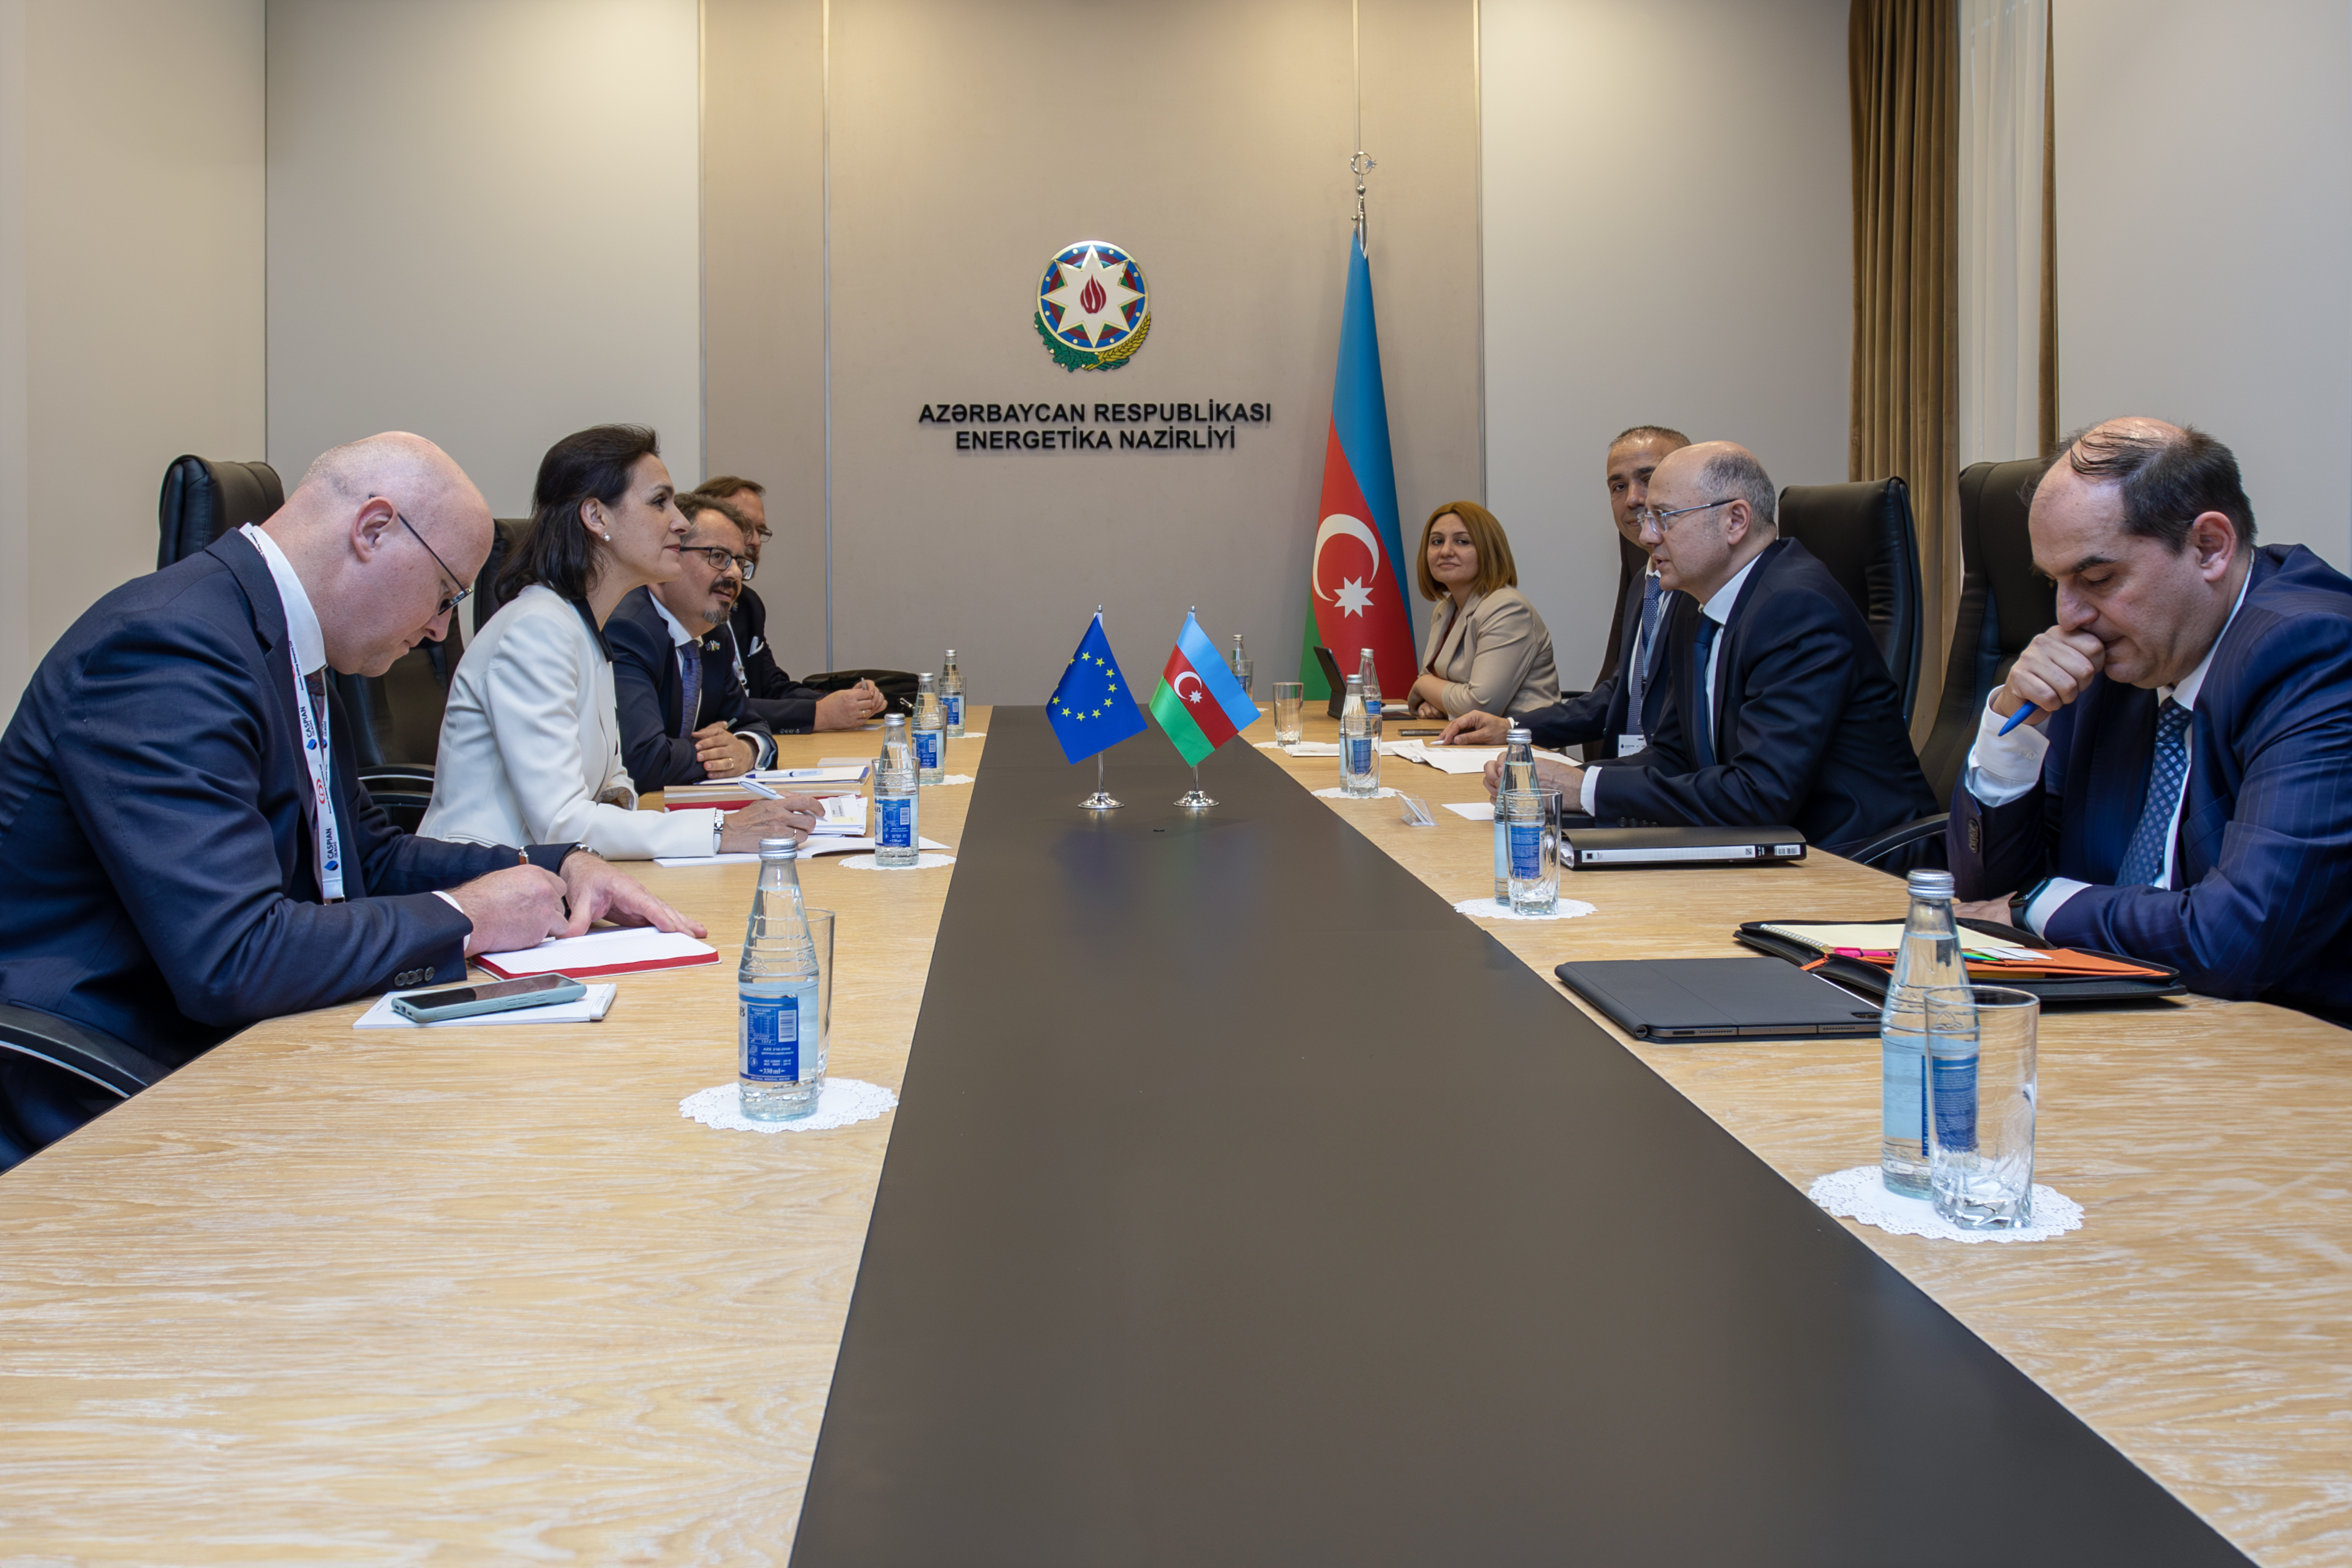 USA and EU discussed development of Azerbaijan's gas and green energy infrastructure projects